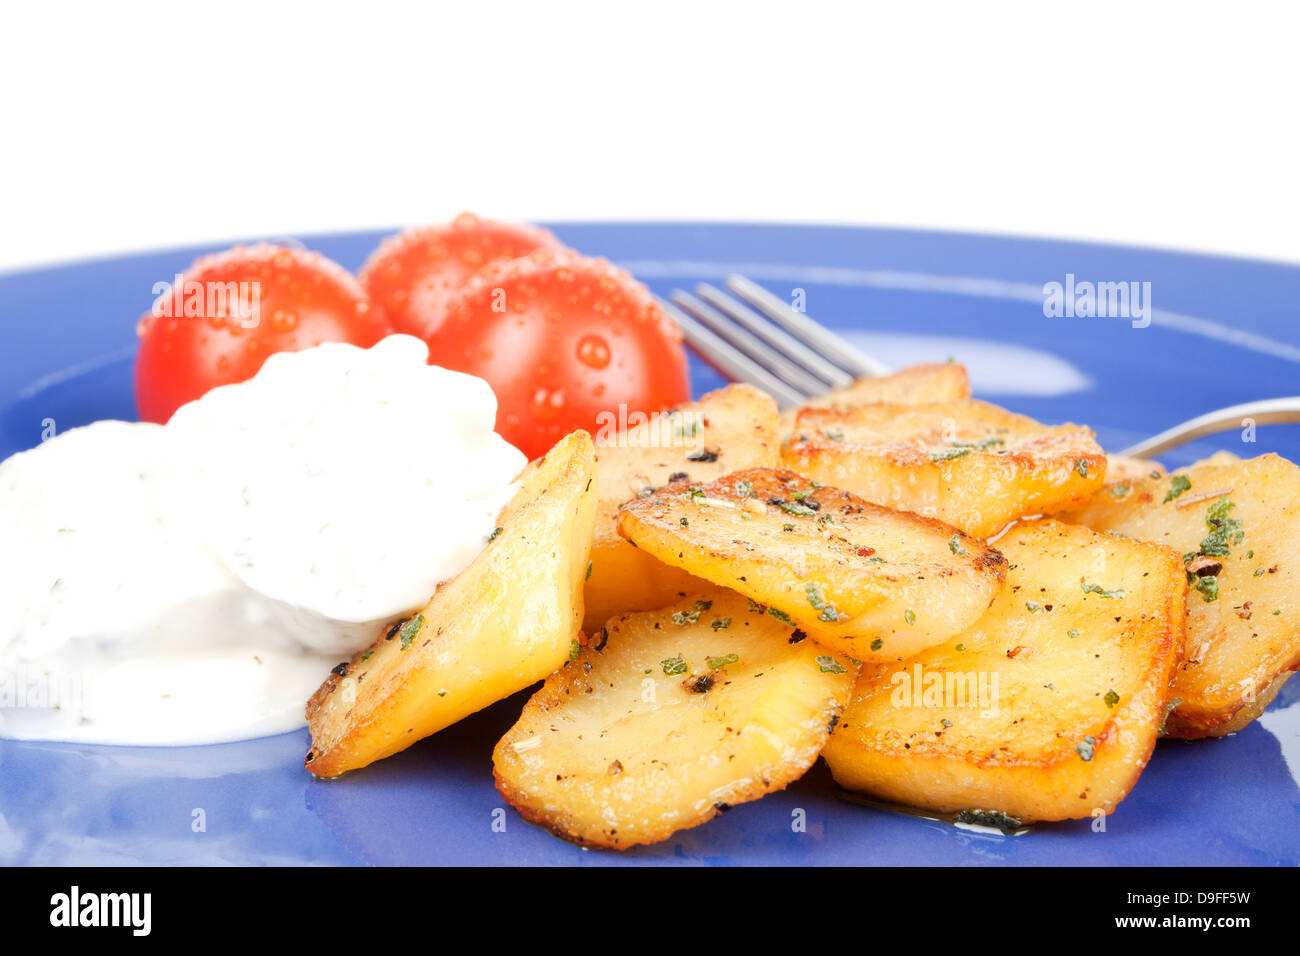 Fried potatoes with tomatoes and curd on a plate Fried potatoes with tomato and cottage cheese on a plate Stock Photo